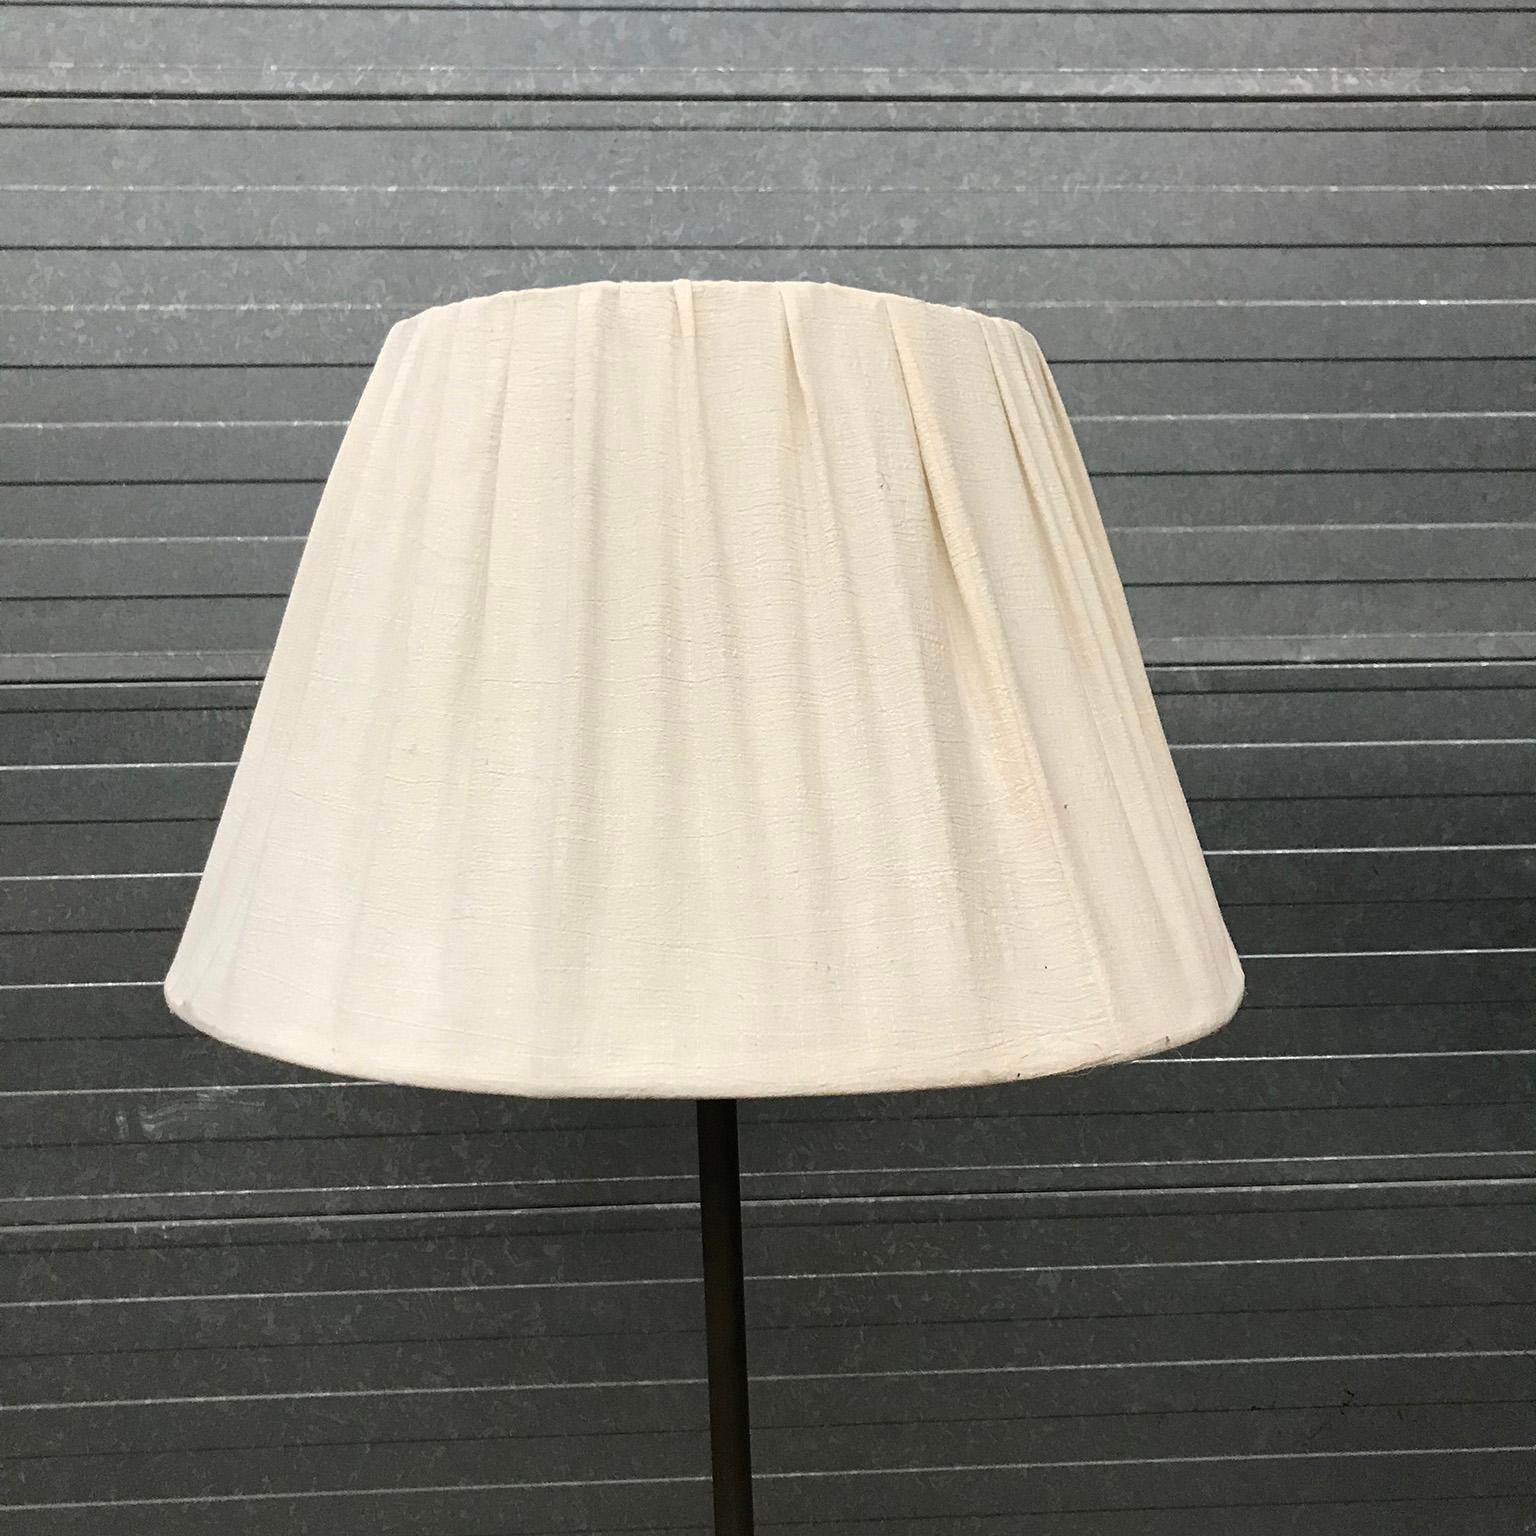 This lamp is part of the private collection of Casey Godrie and is situated in his private house. 
Ask him for competitive shipping quotes. His incredible Dune Villa, Amsterdam Beach, check last four pictures of this listing or  find more details on